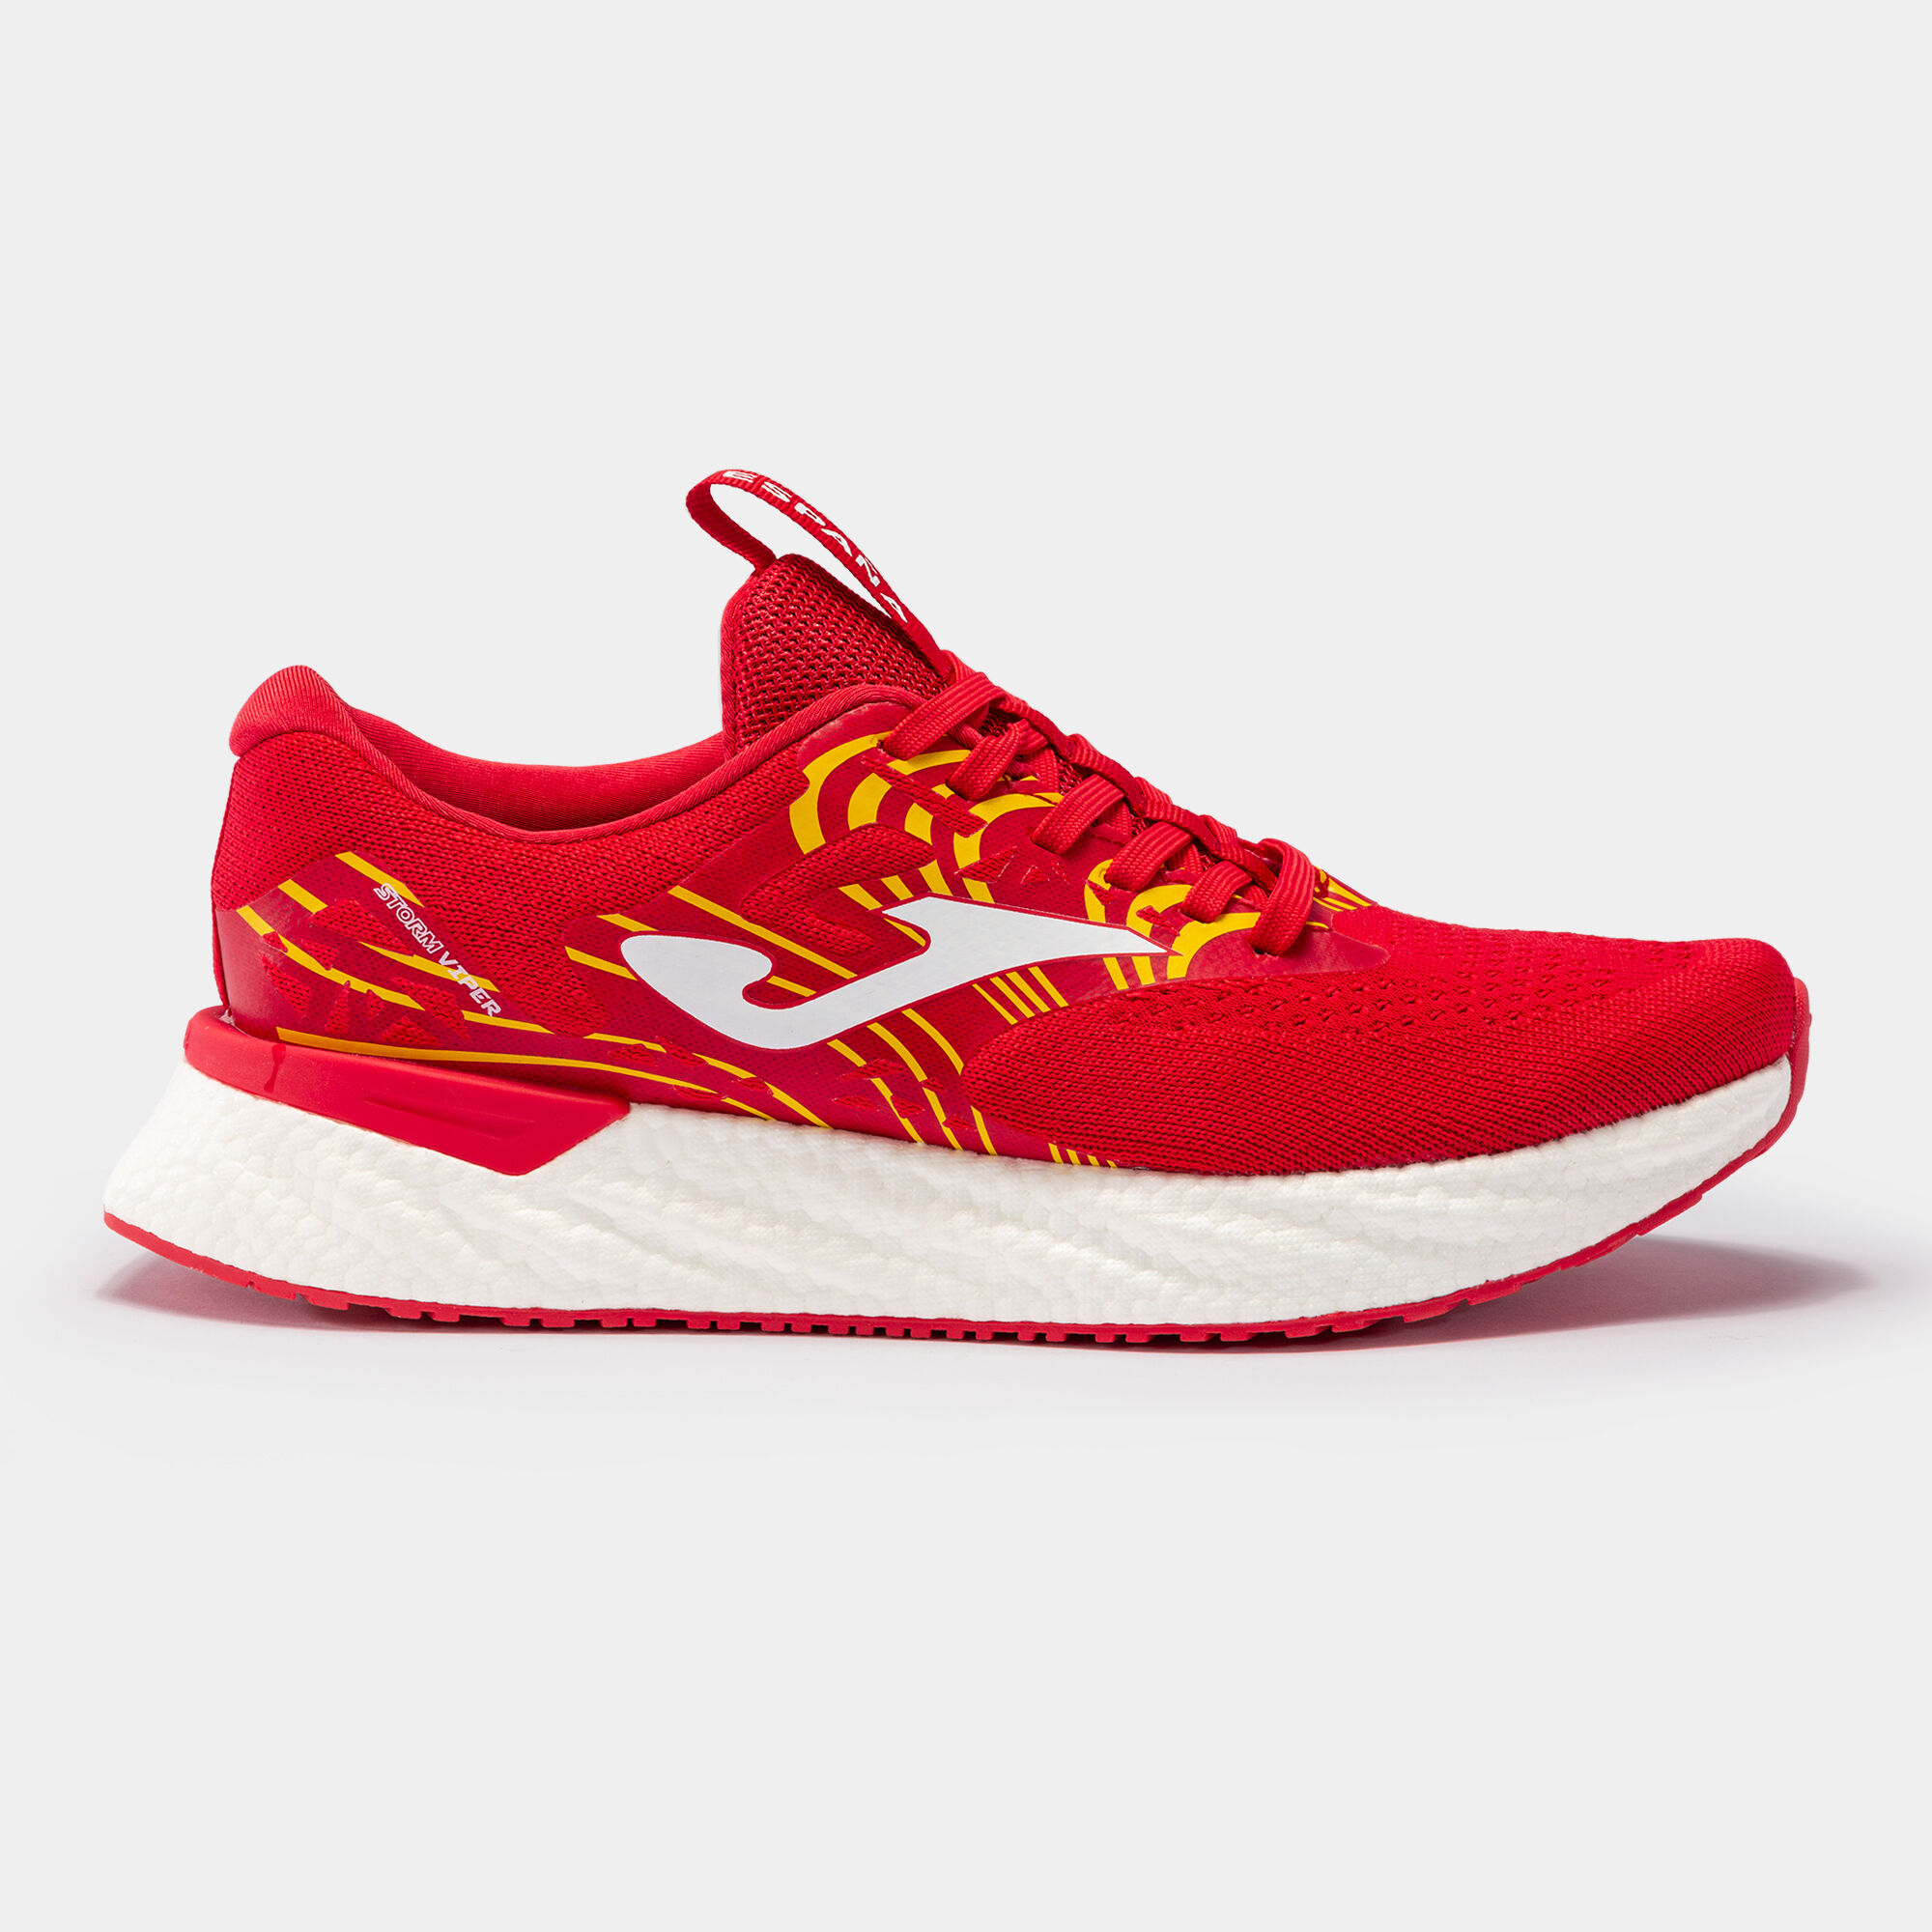 RUNNING SHOES VIPER 22 SPAIN MAN RED